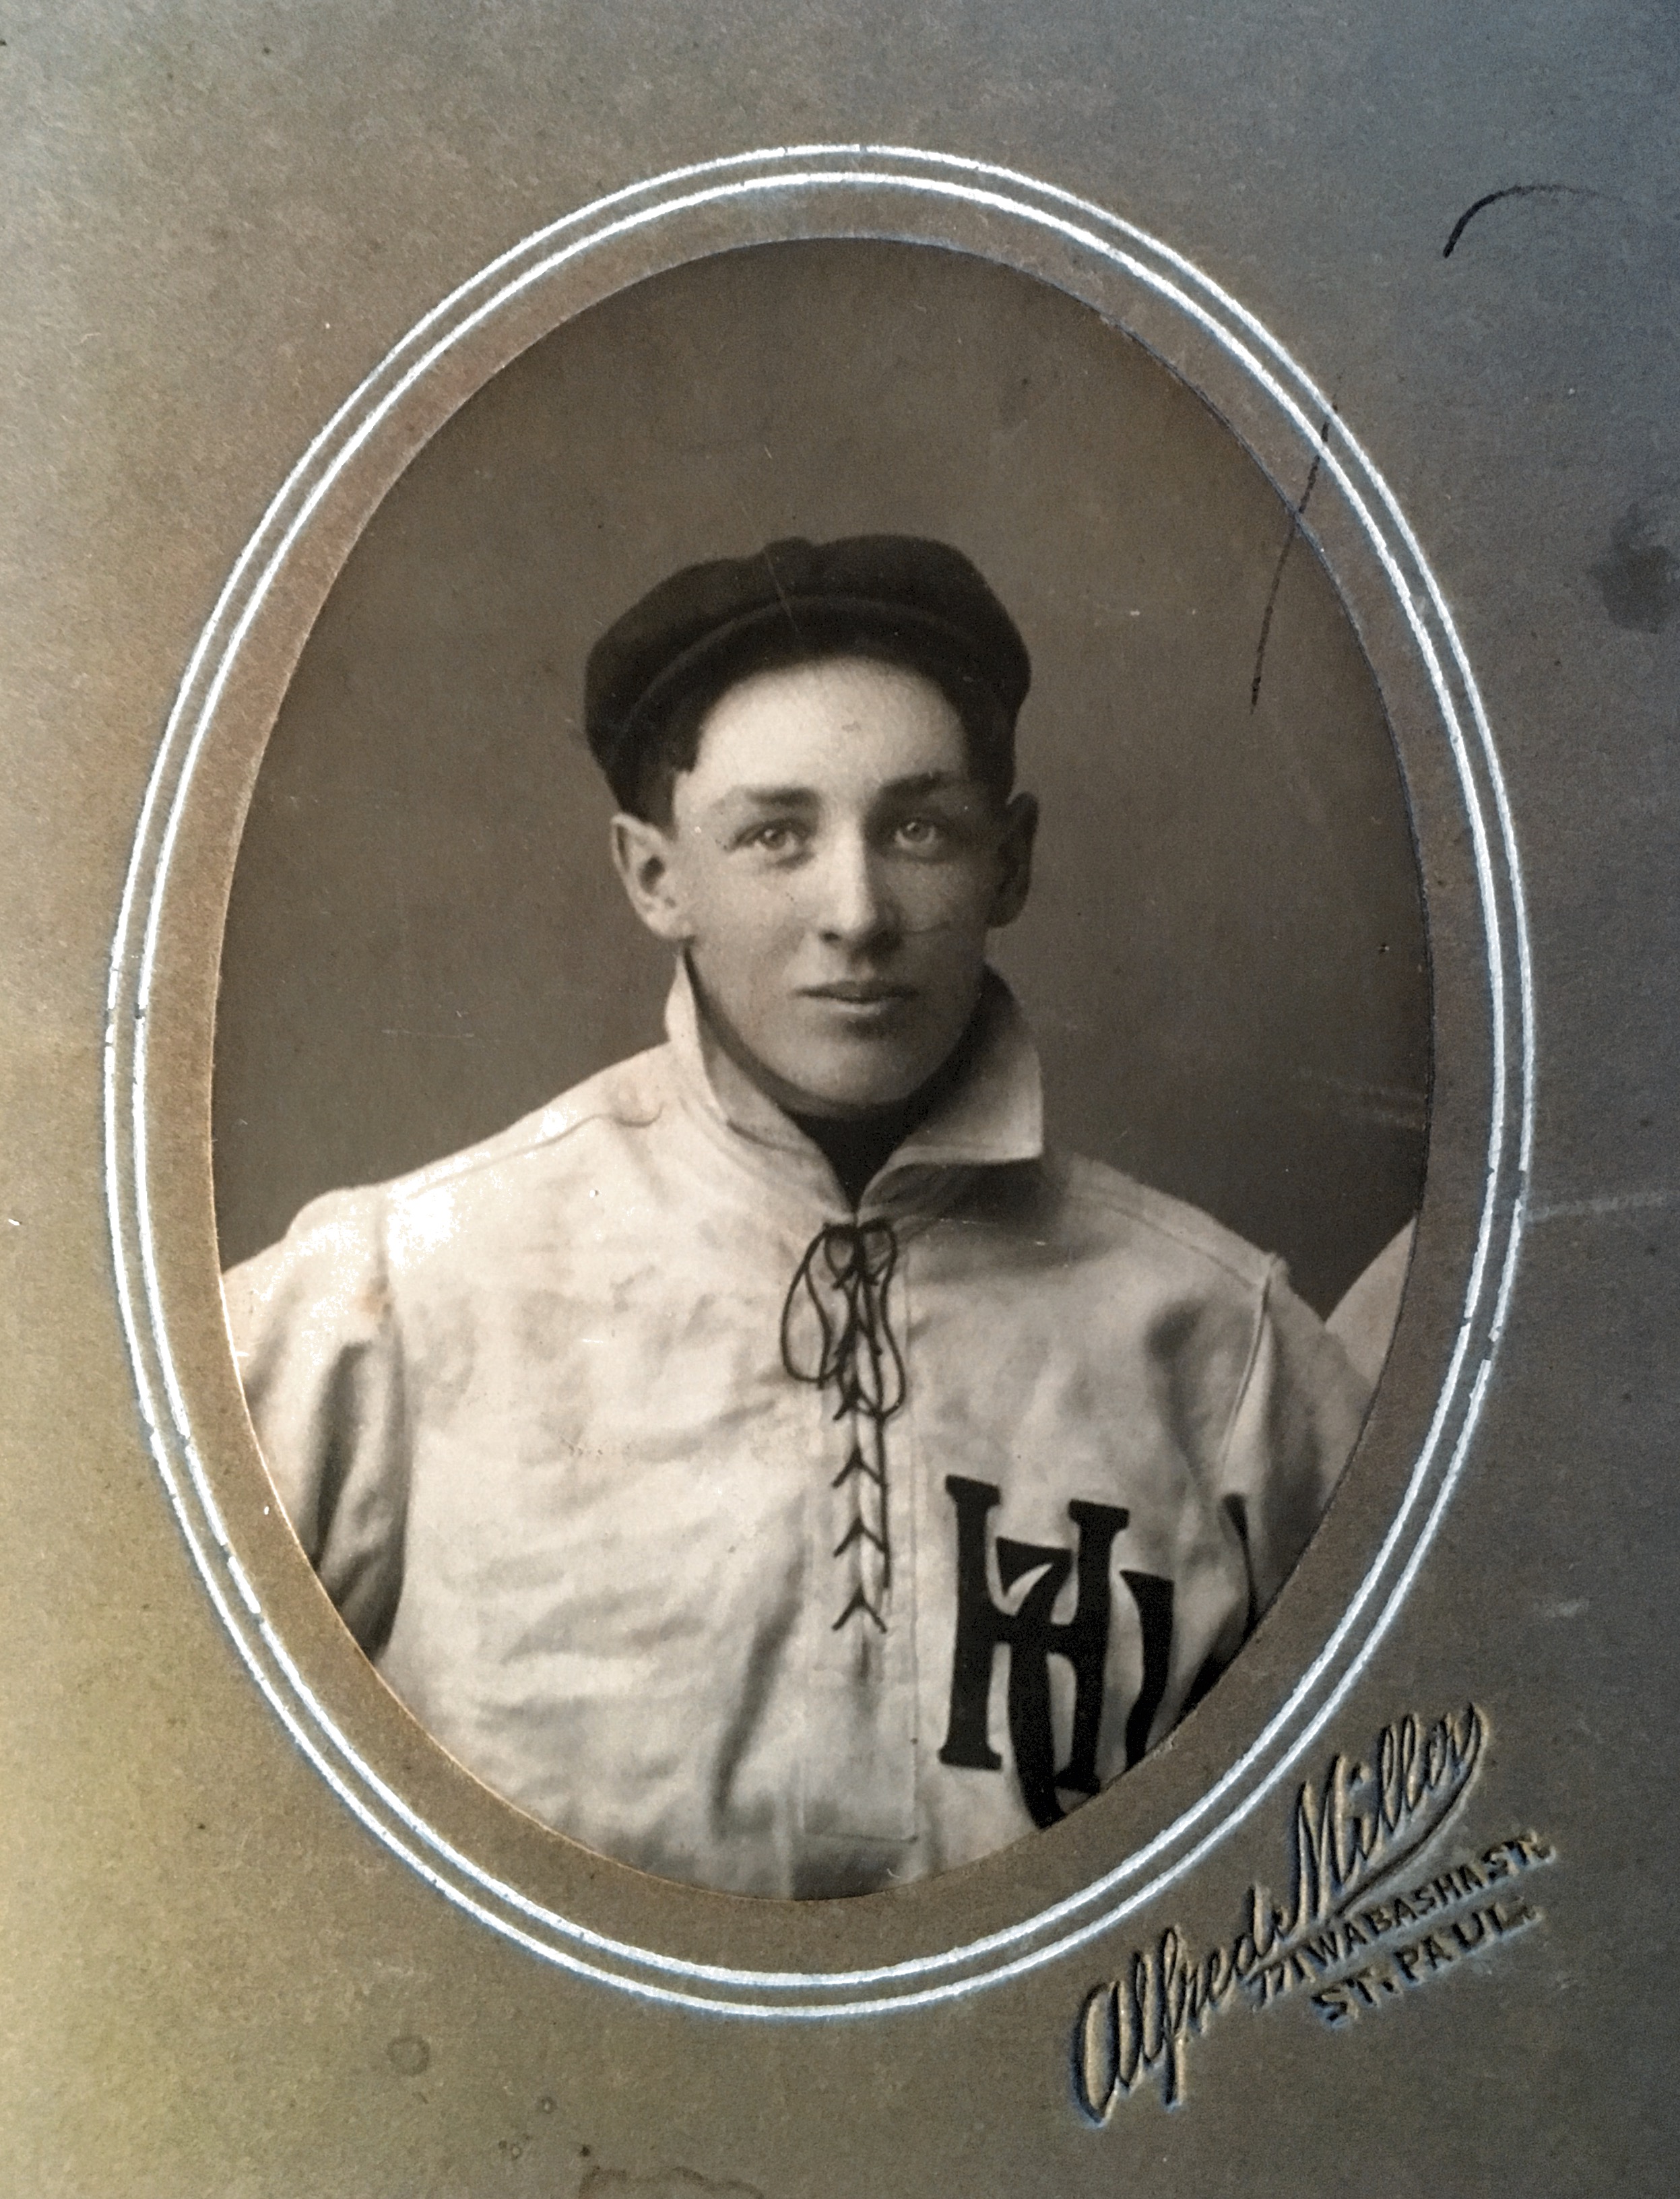 University of Hamlin baseball picture about 1905. My grandfather.